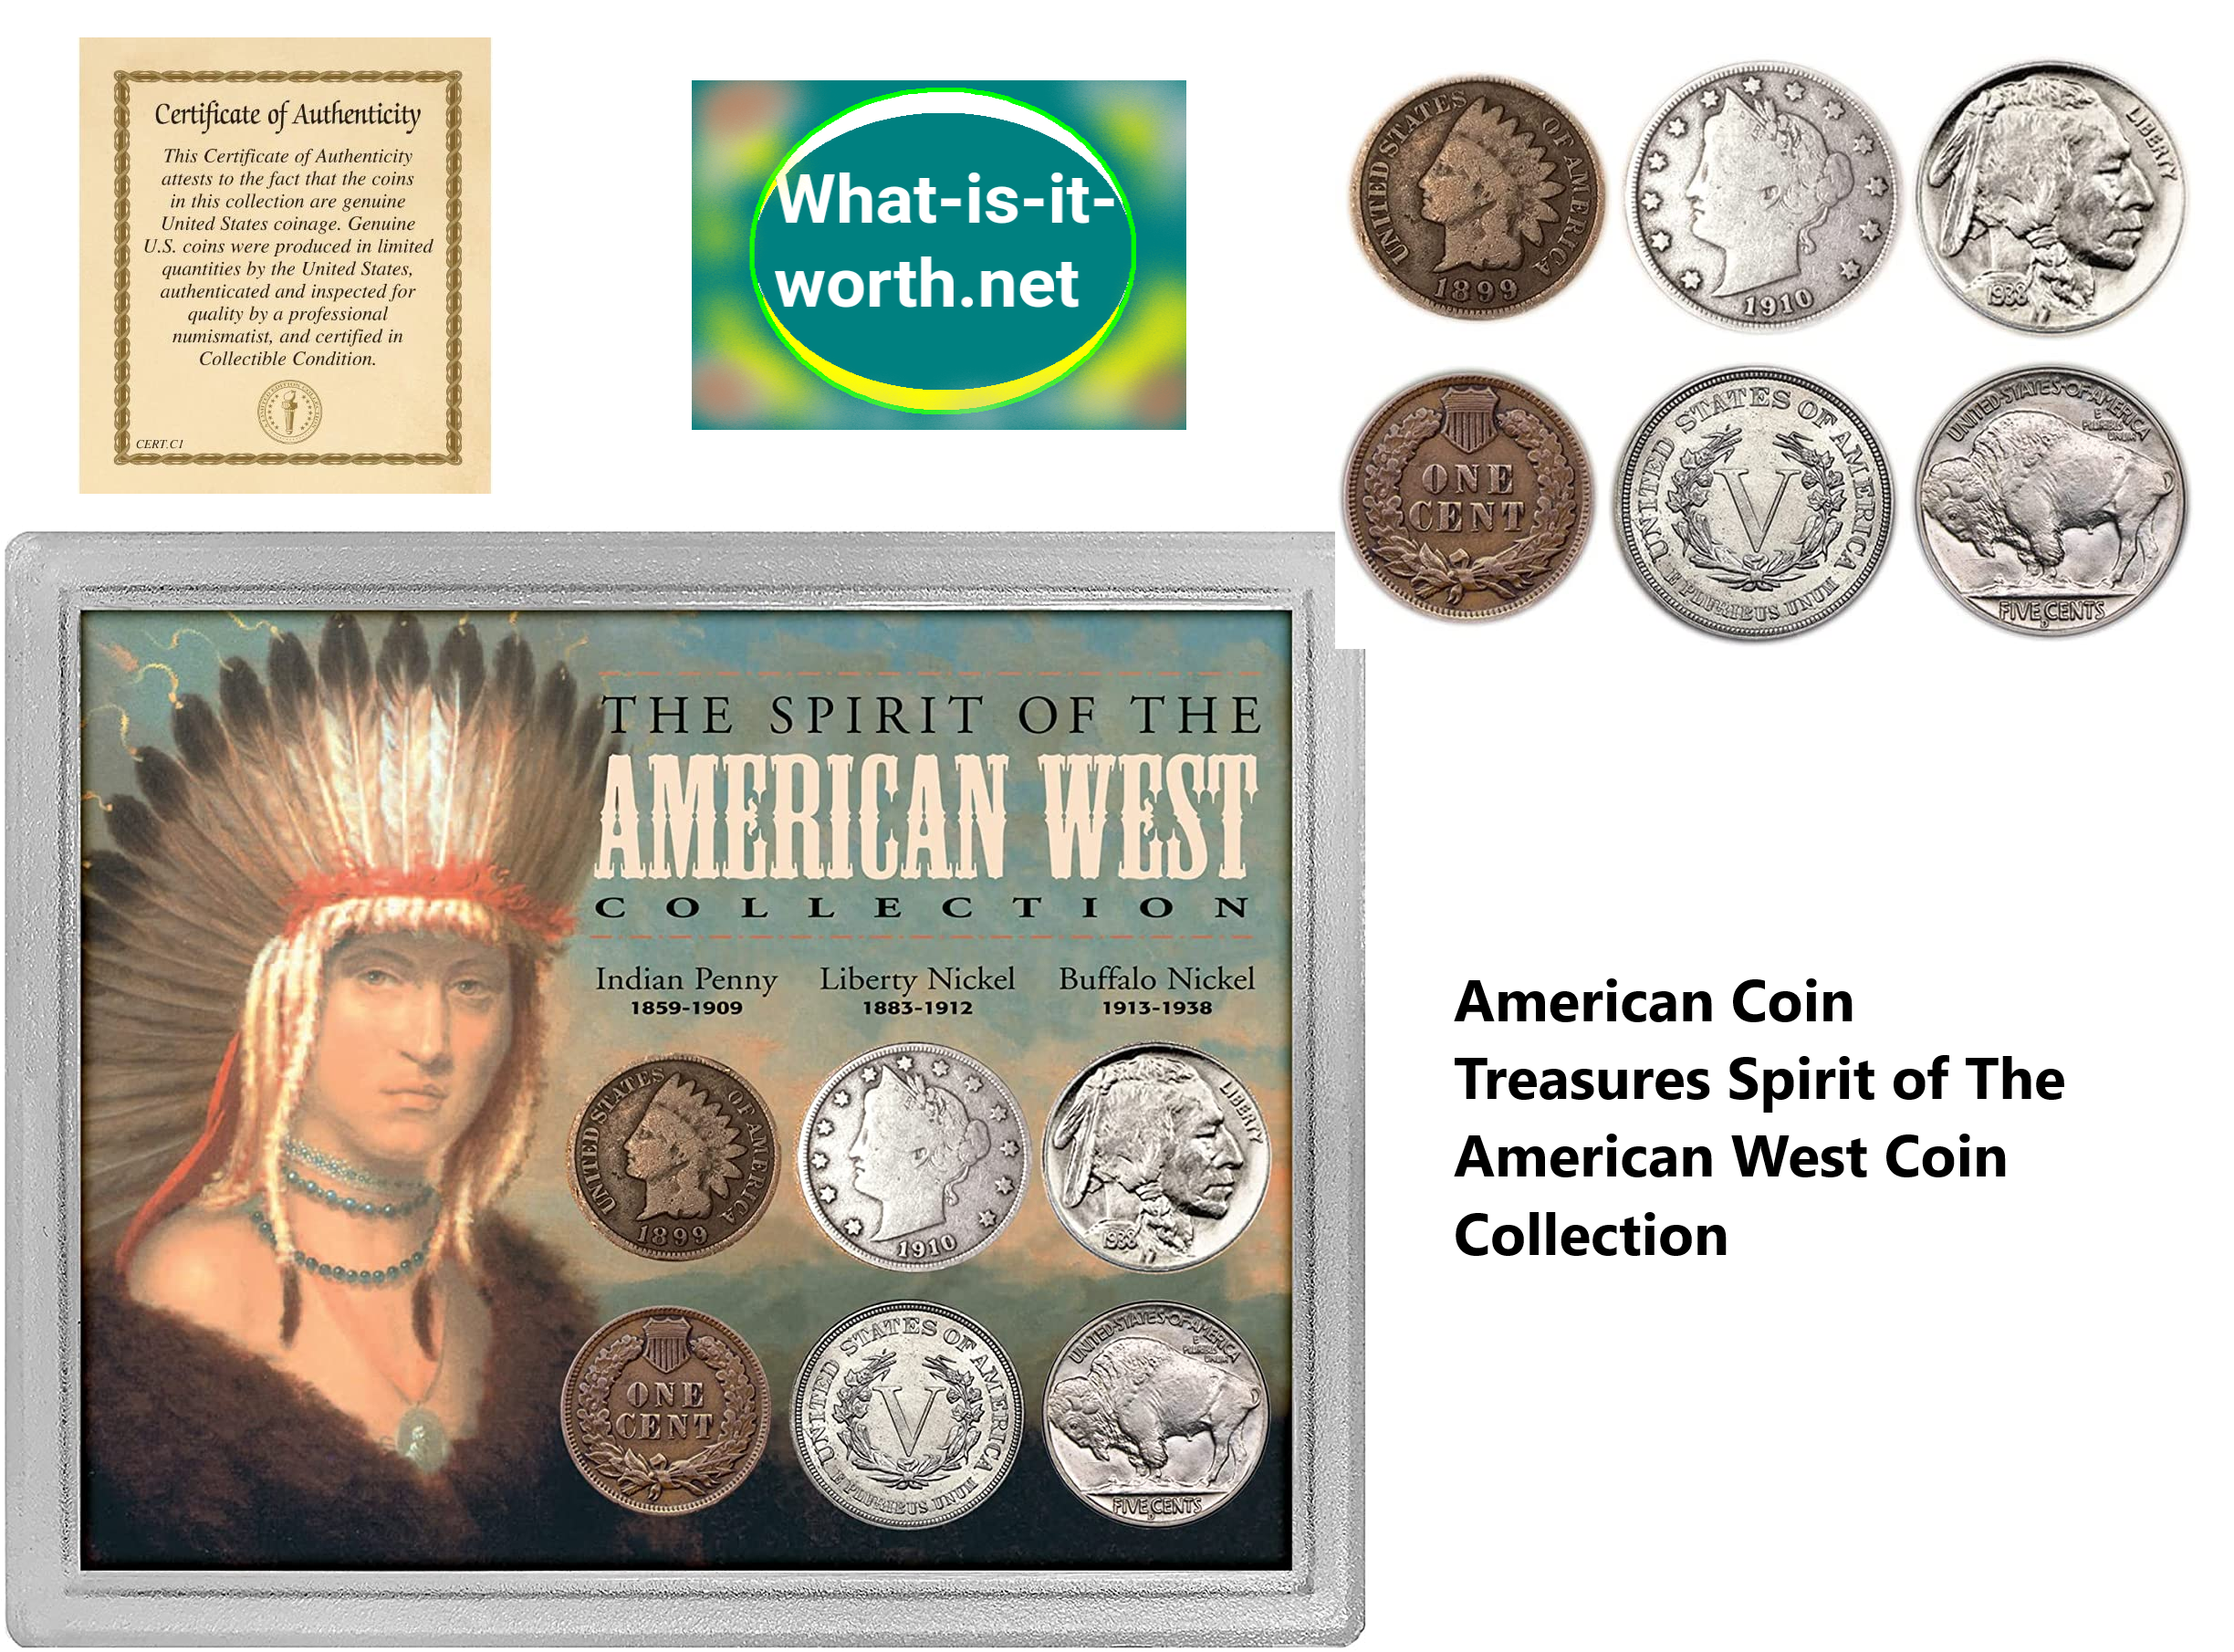 American Coin Treasures Spirit of The American West Coin Collection 